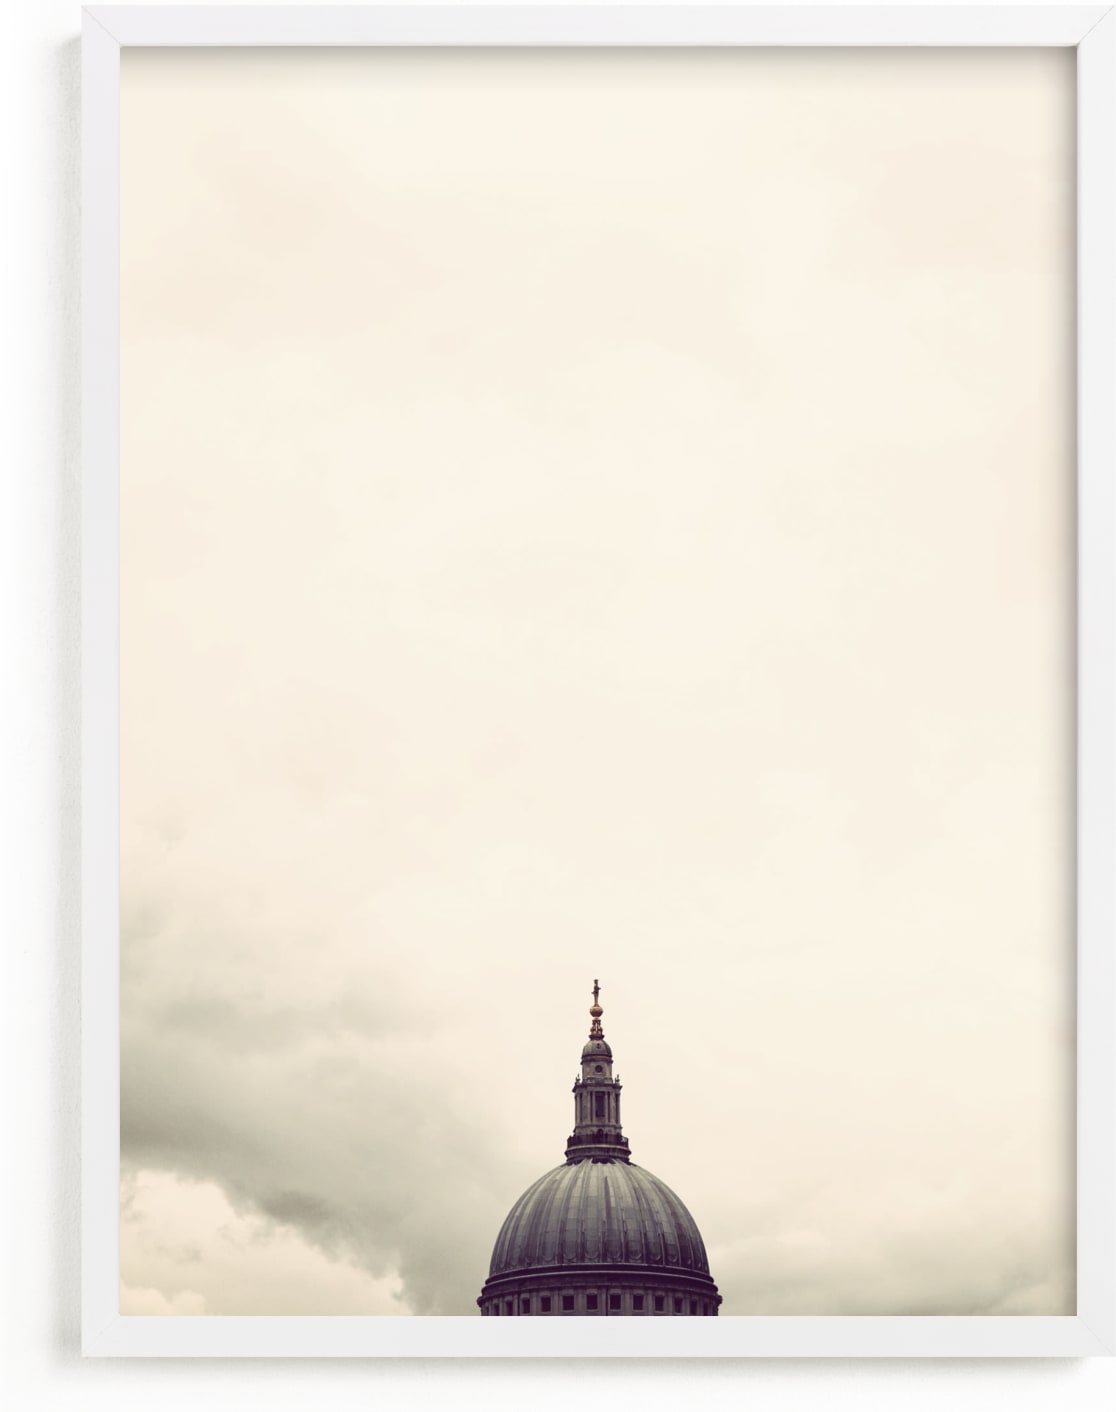 This is a white art by 45wall design called St. Paul's Cathedral, London.